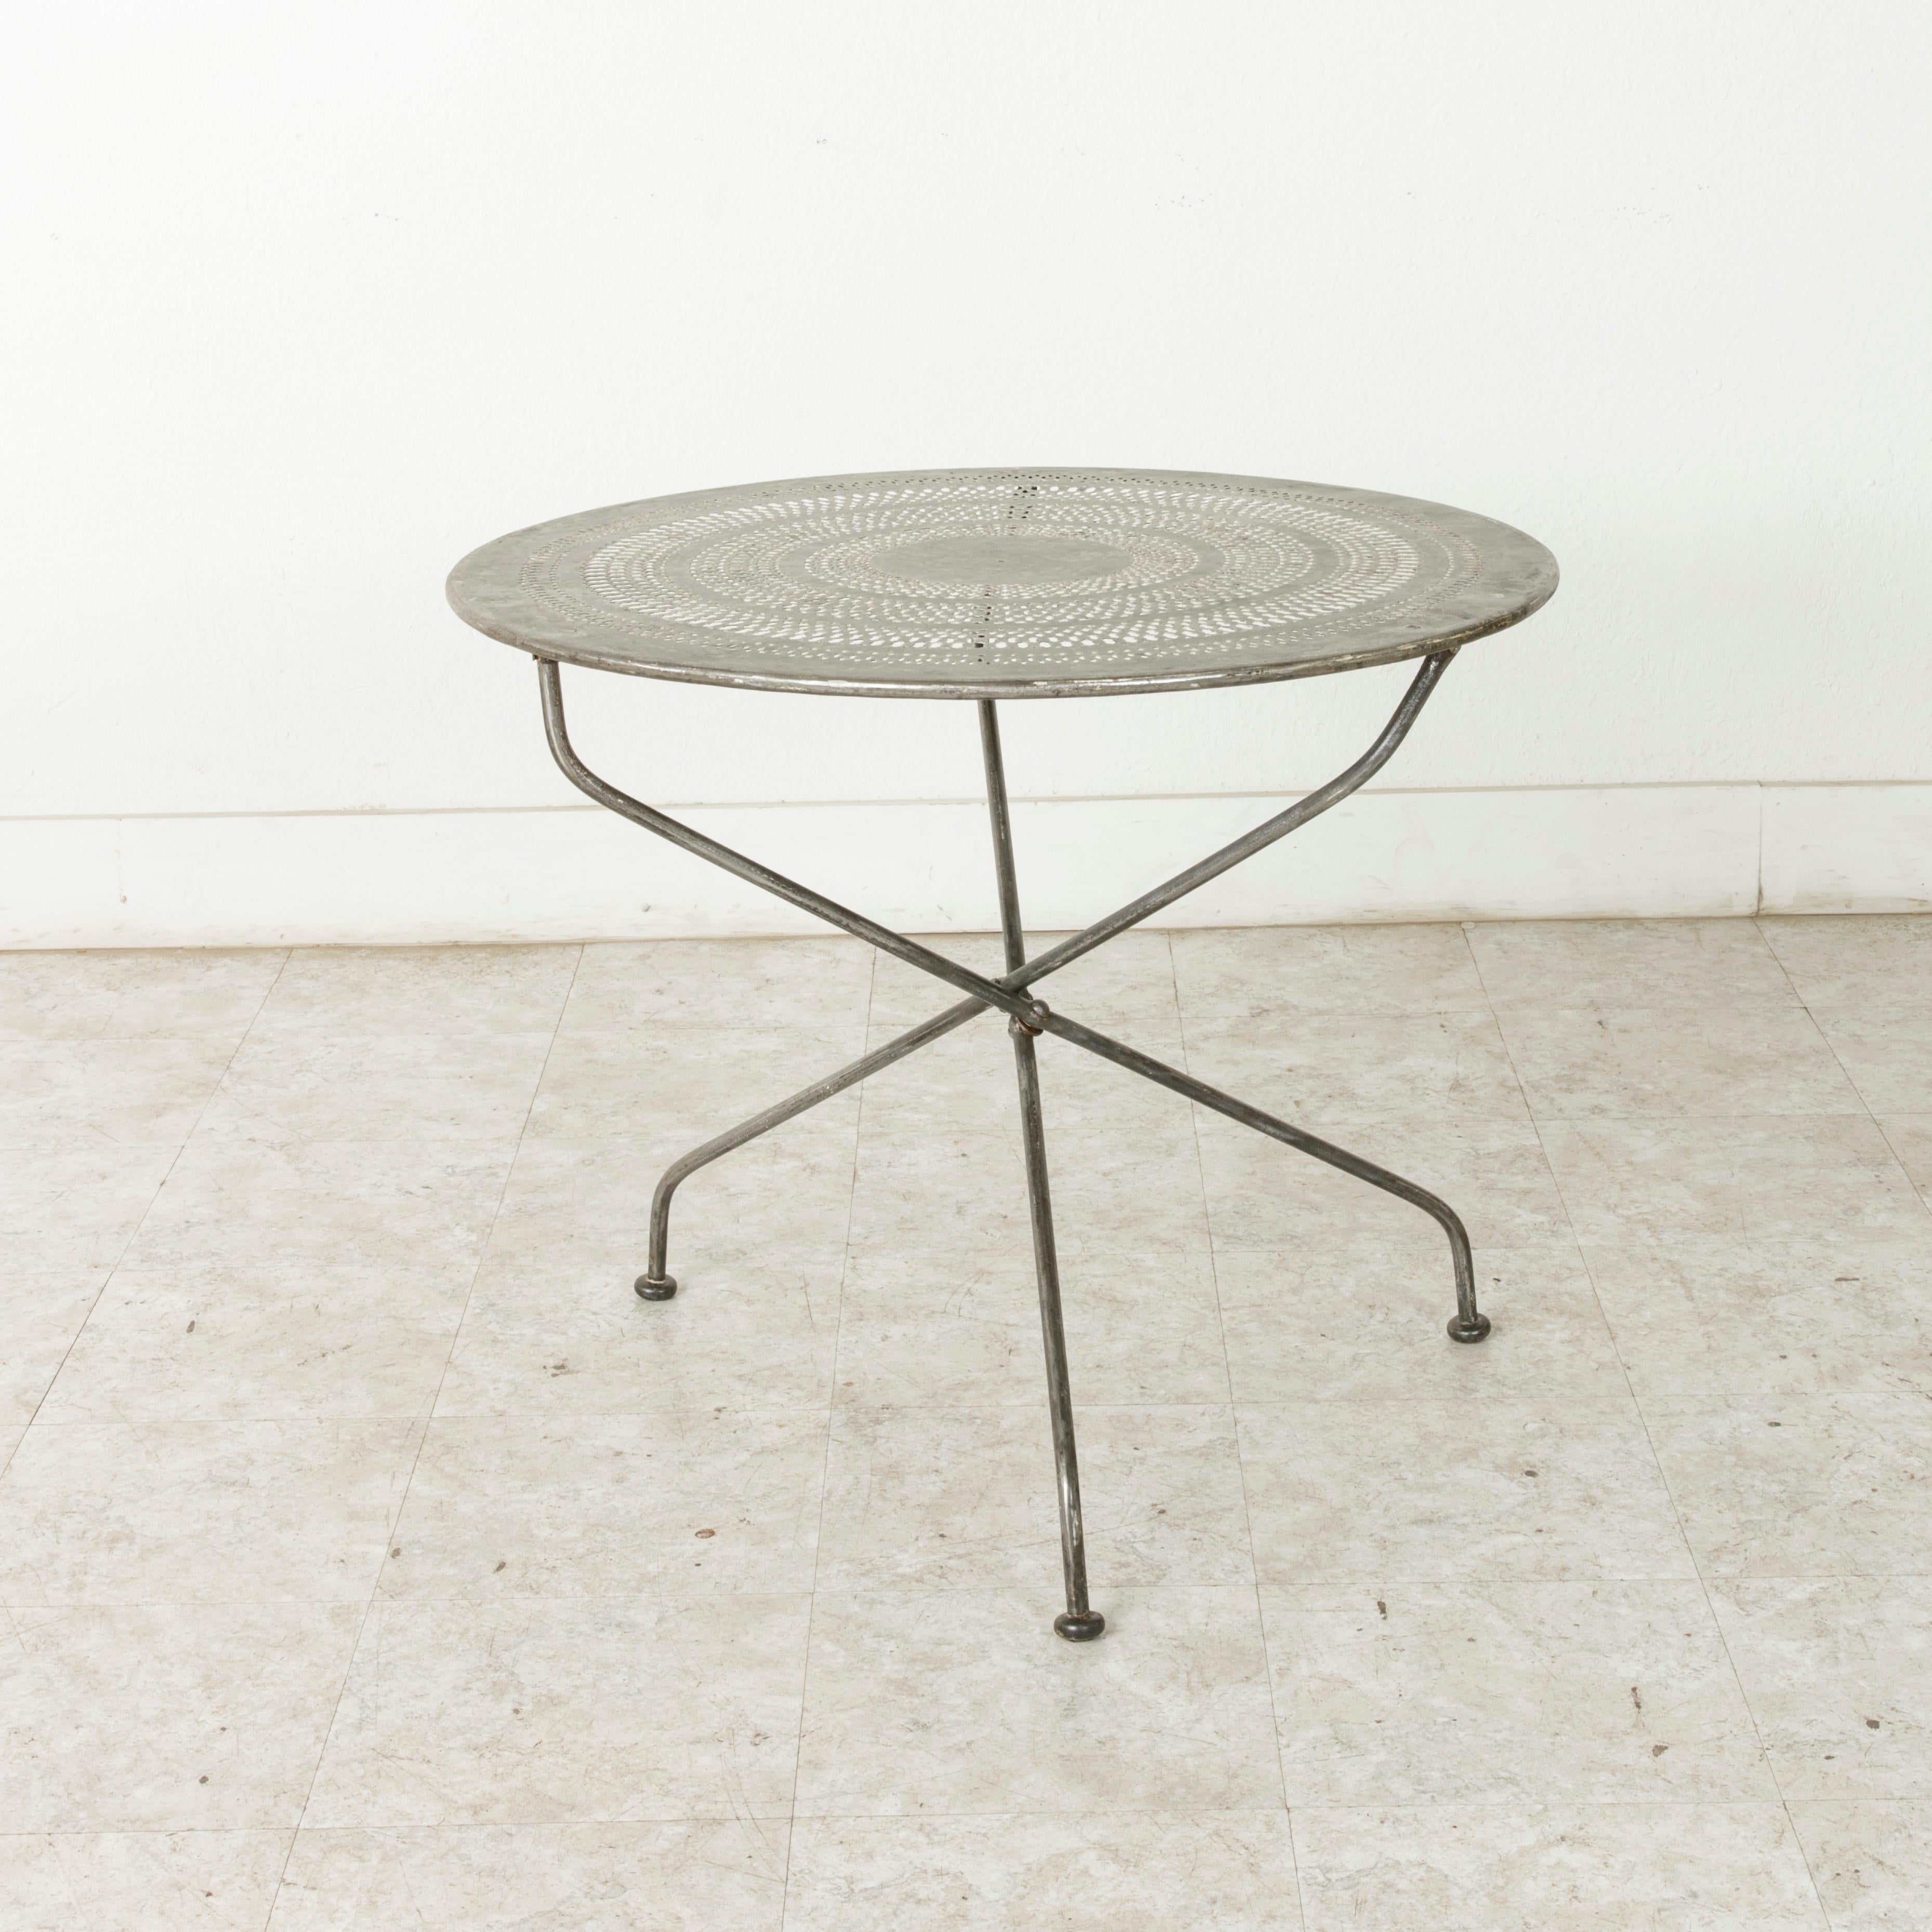 Mid-20th Century French Folding Pierced Metal Outdoor Garden Table, Cafe Table 4